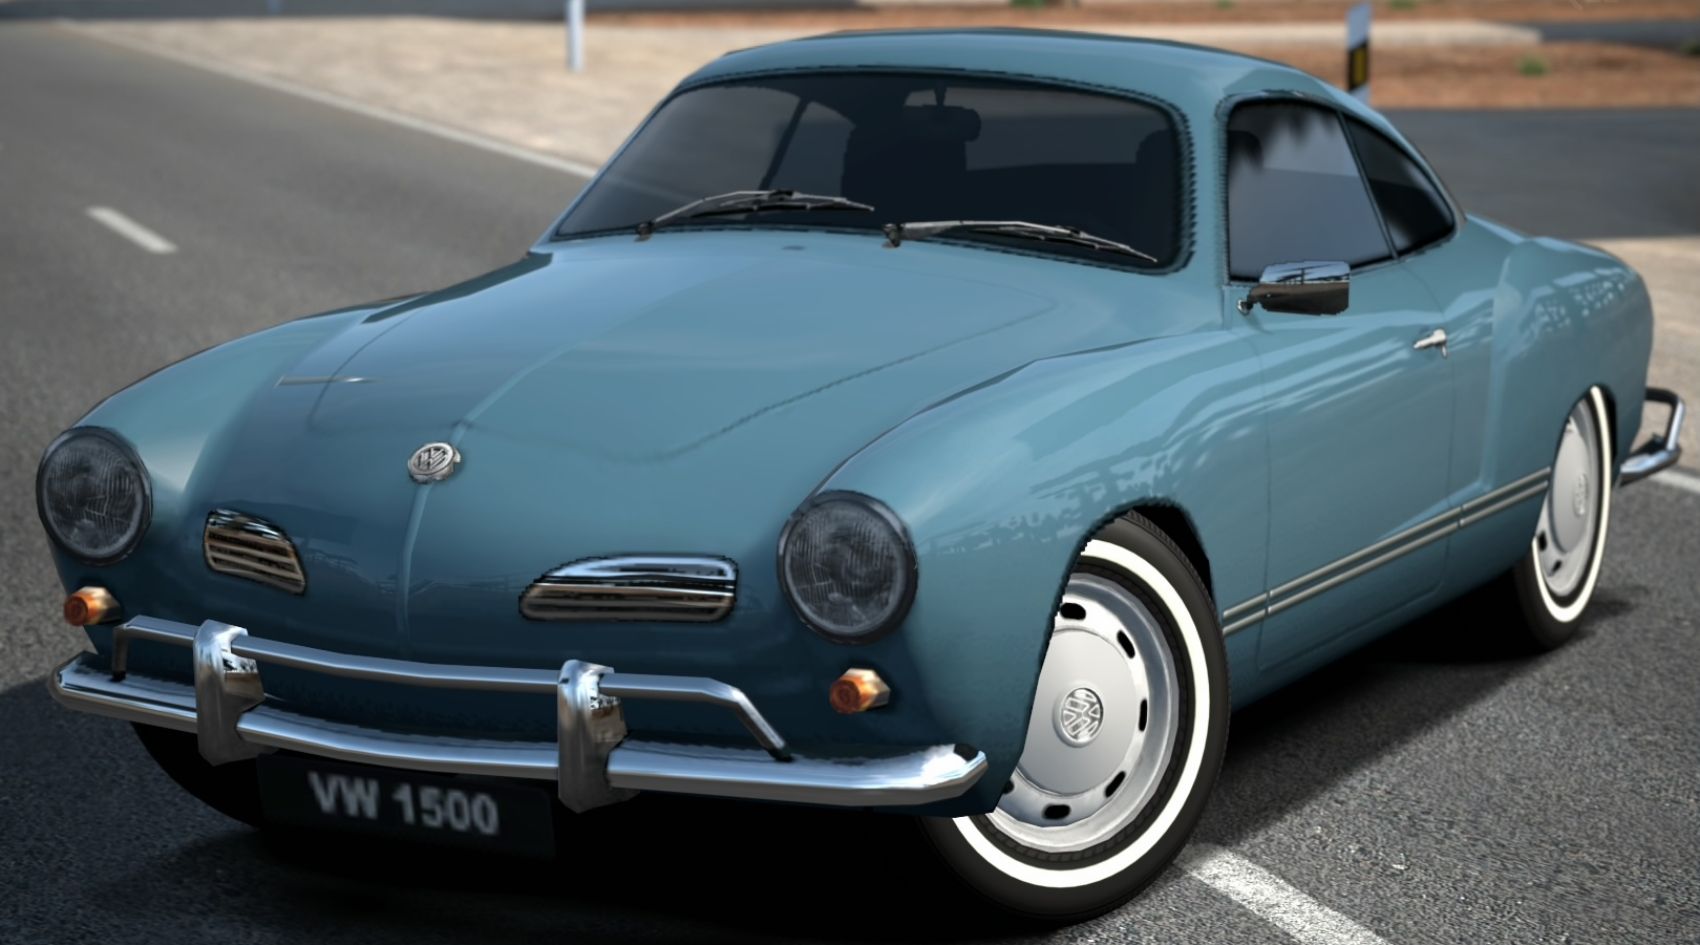 You Want This -1968 Volkswagen Karmann Ghia Coupe